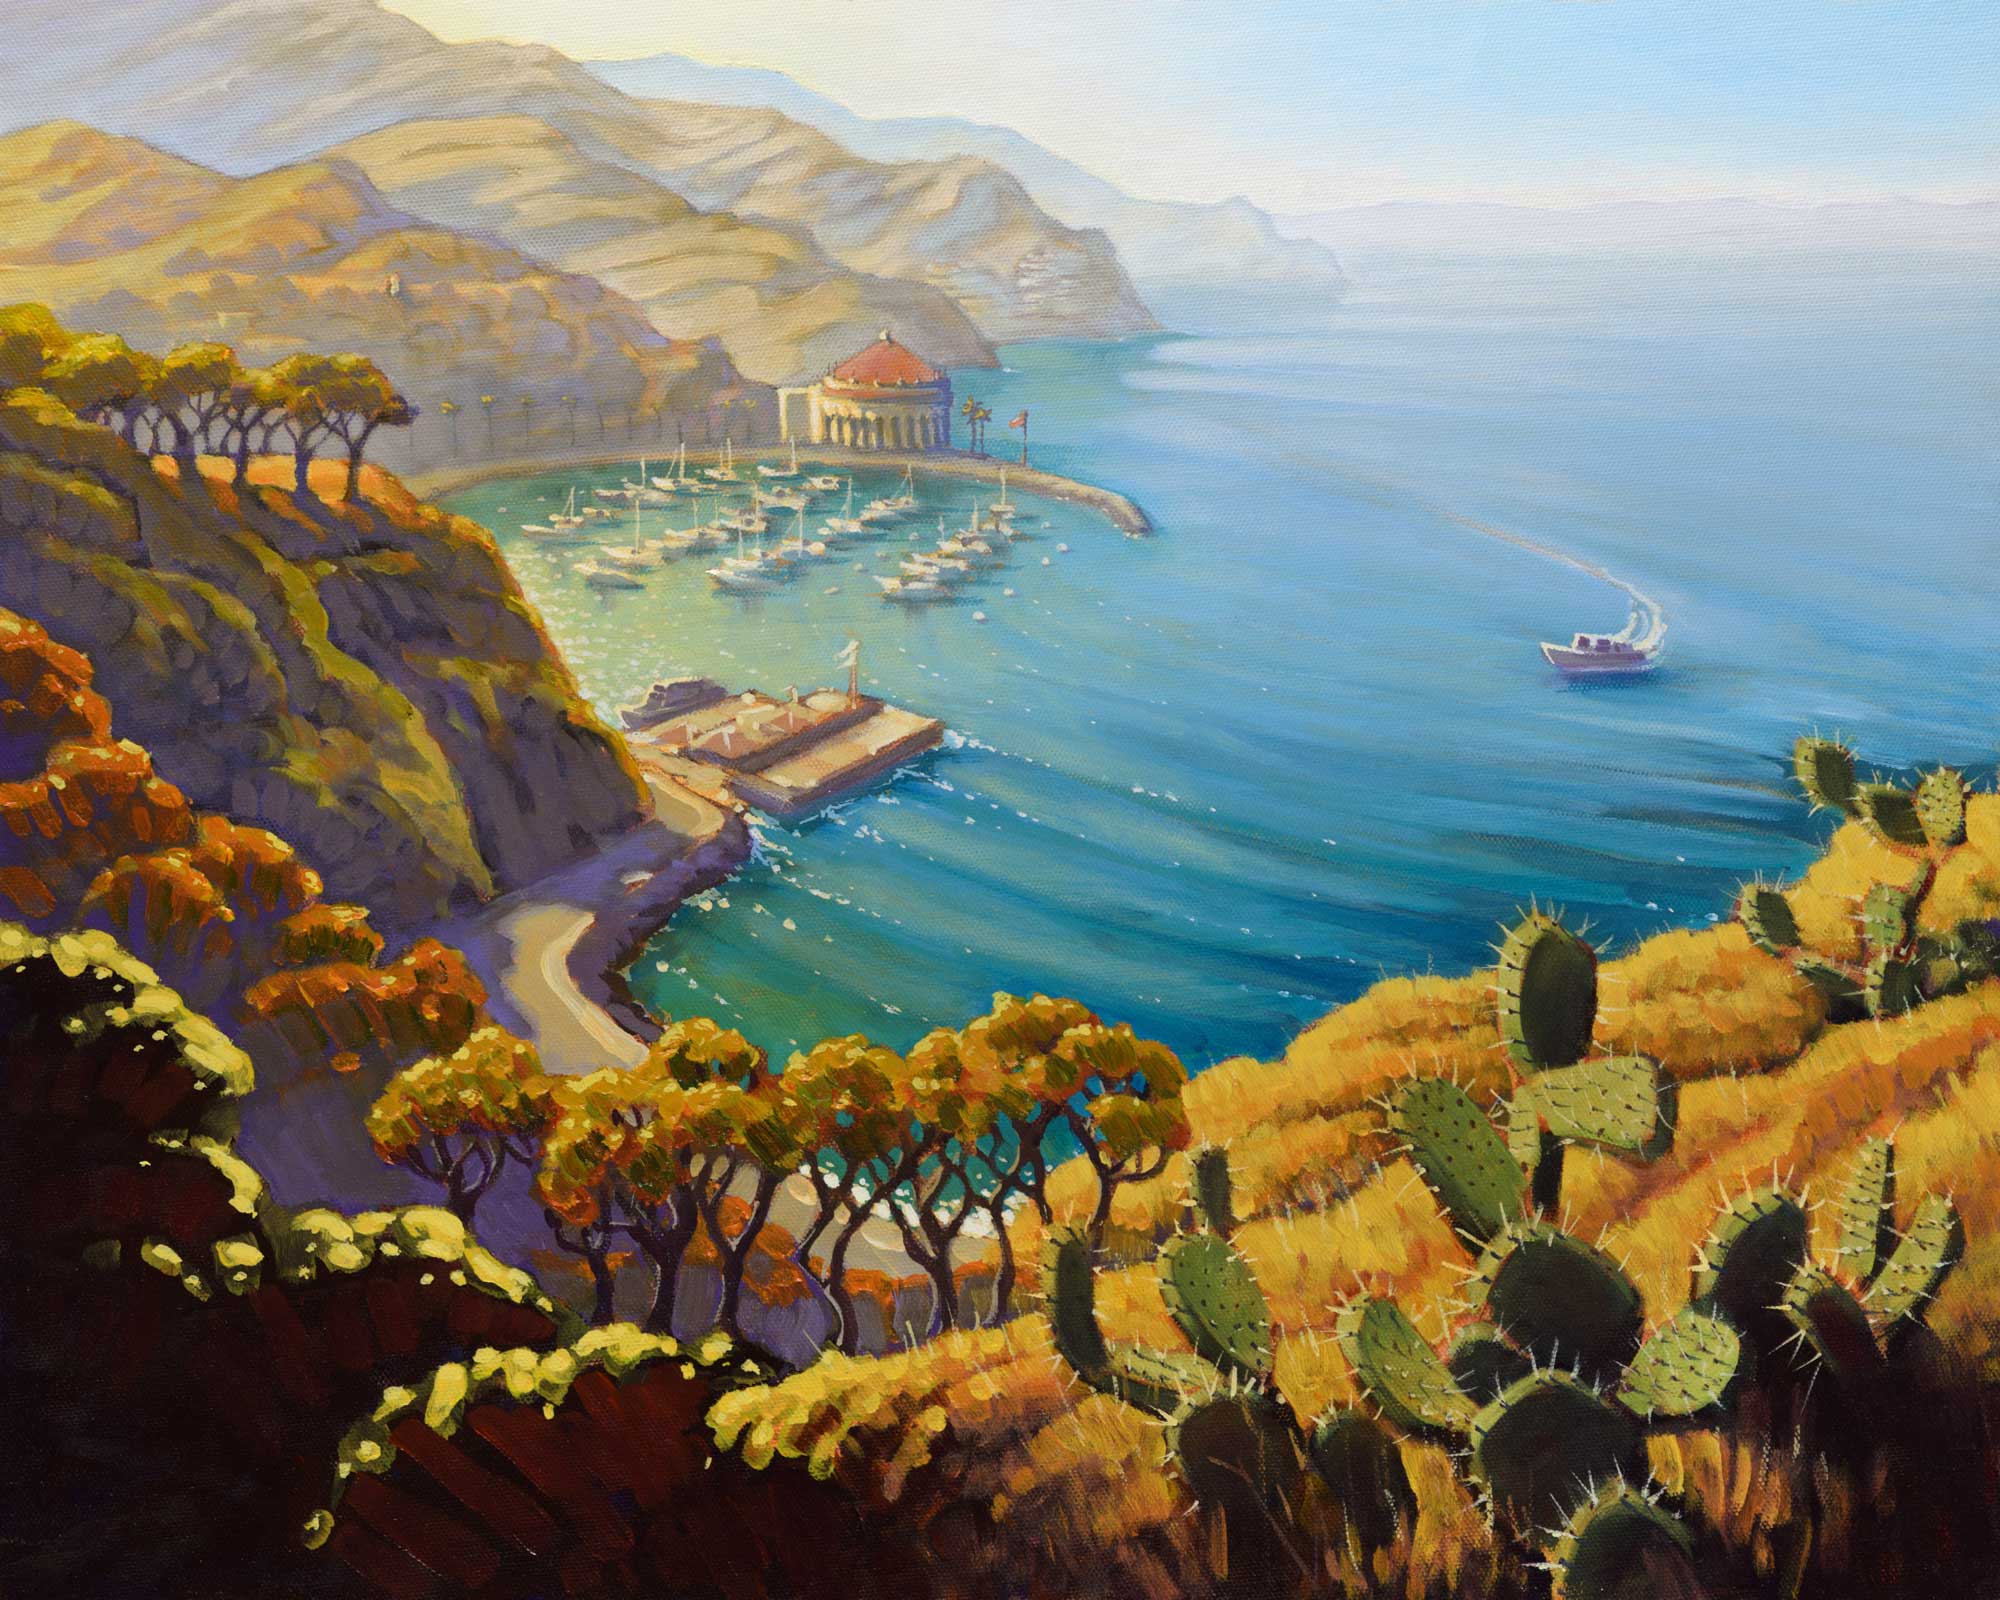 A plein air painting of the view over Avalon Harbor on Catalina Island off the coast of southern California